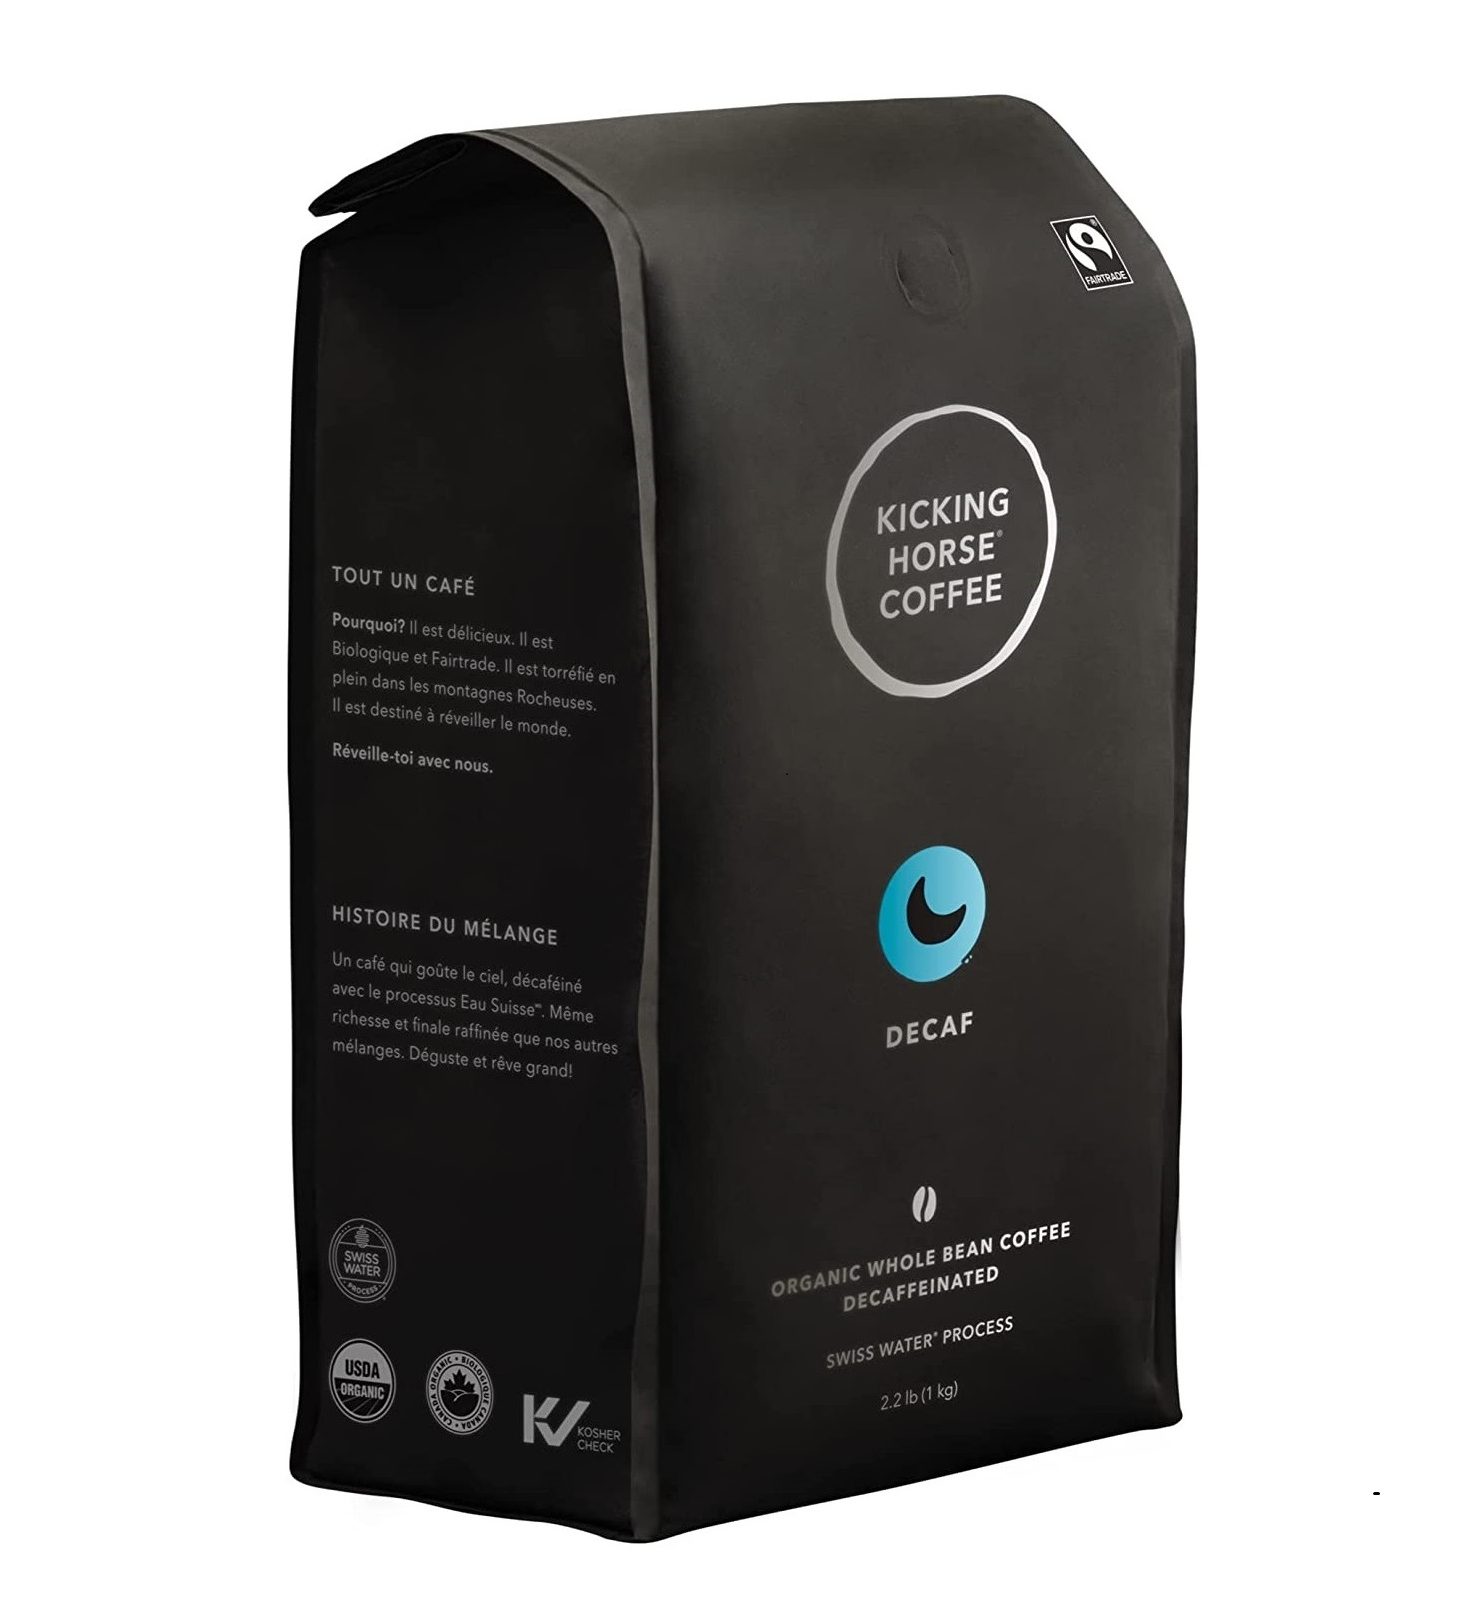 Kicking Horse Coffee, Decaf, Swiss Water Process, Dark Roast, Whole Bean, 2.2 Pound - Certified Organic, Fairtrade, Kosher Coffee, 35.2 Ounces Market, Coffee Buzz Free Decaf French Roast Ground Organic, 10 Ounce